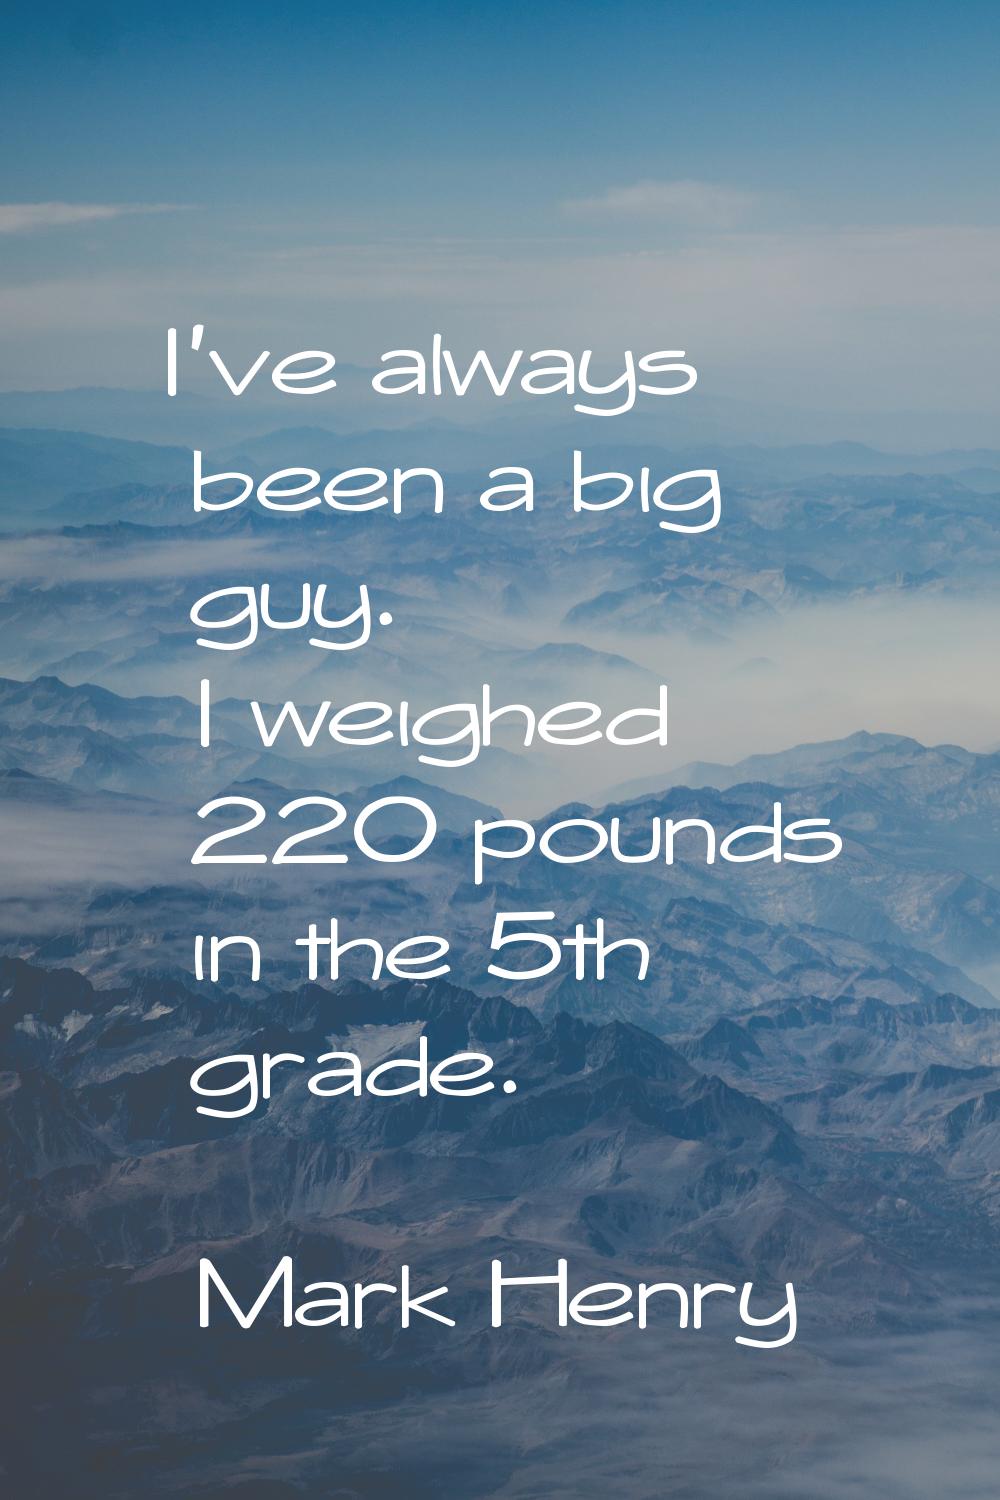 I've always been a big guy. I weighed 220 pounds in the 5th grade.